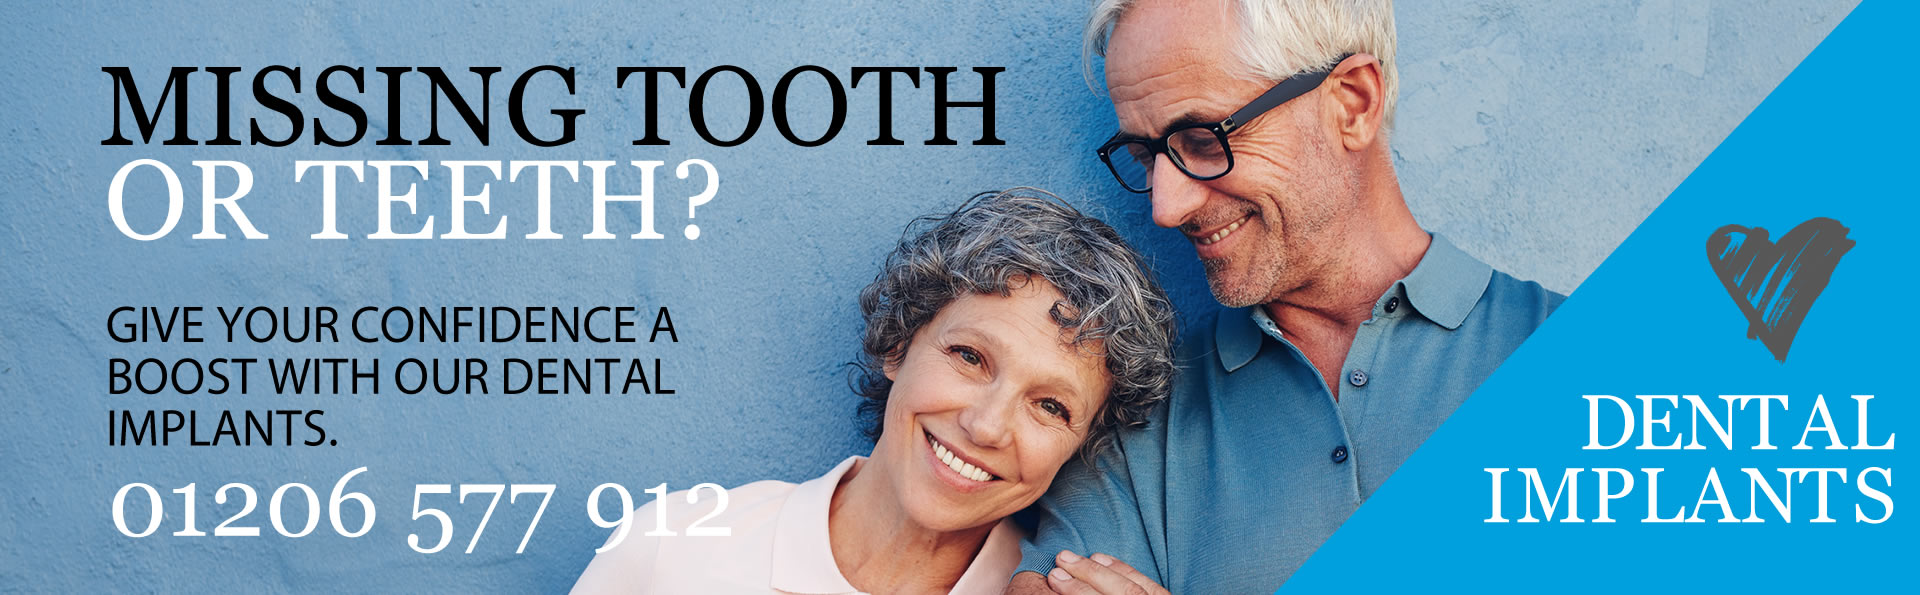 Dental Implants with Northhill Dental